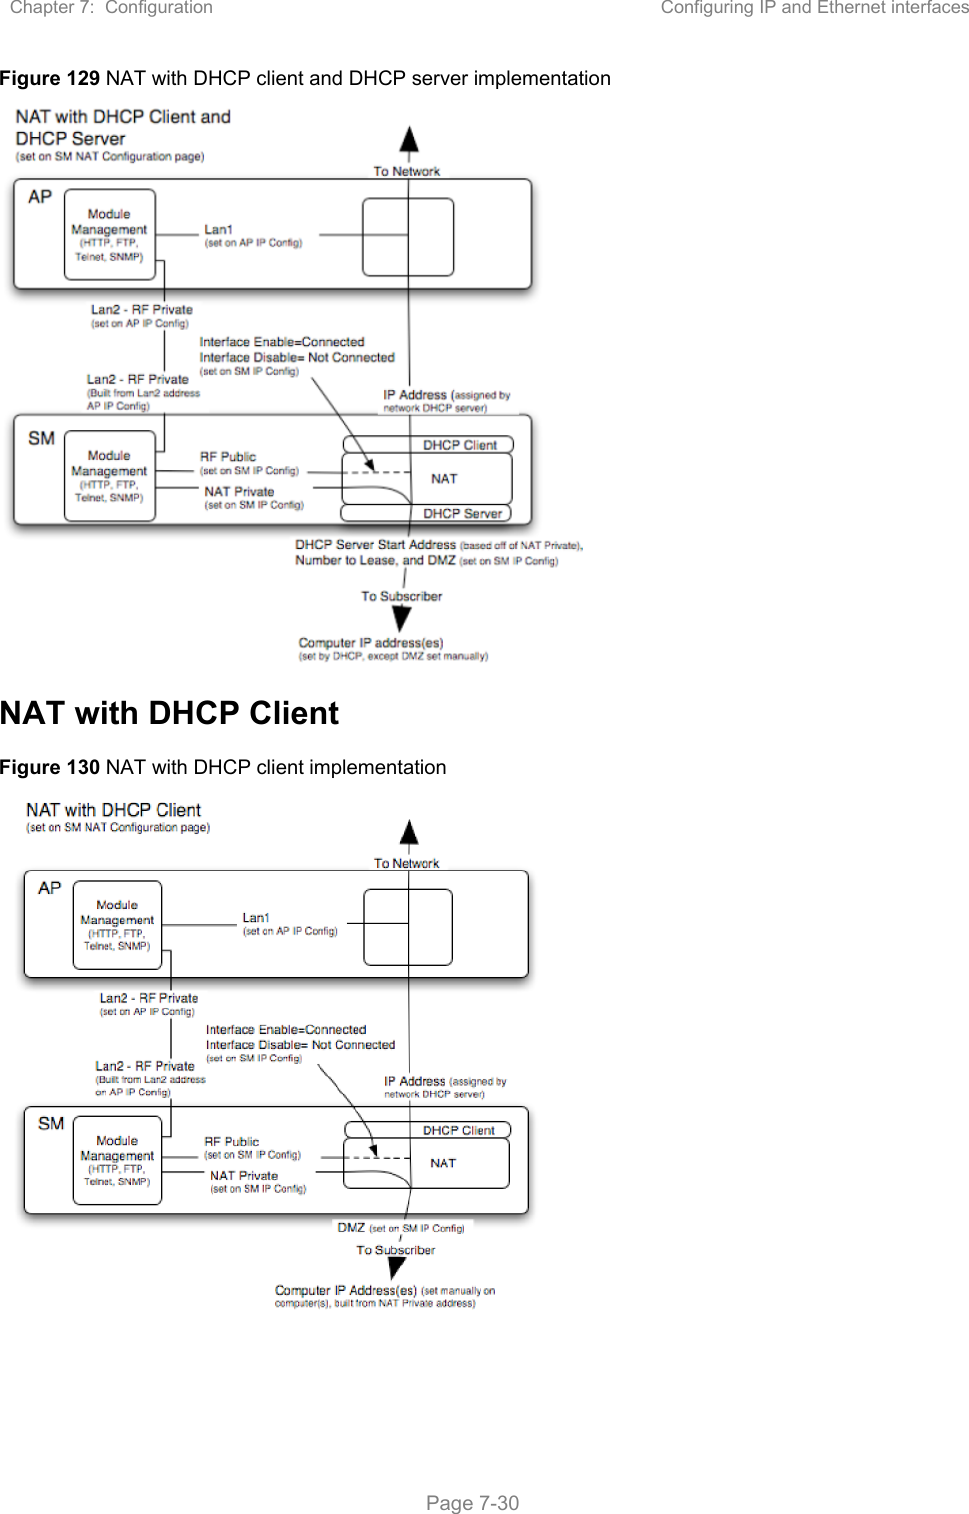 Chapter 7:  Configuration  Configuring IP and Ethernet interfaces   Page 7-30 Figure 129 NAT with DHCP client and DHCP server implementation  NAT with DHCP Client Figure 130 NAT with DHCP client implementation  